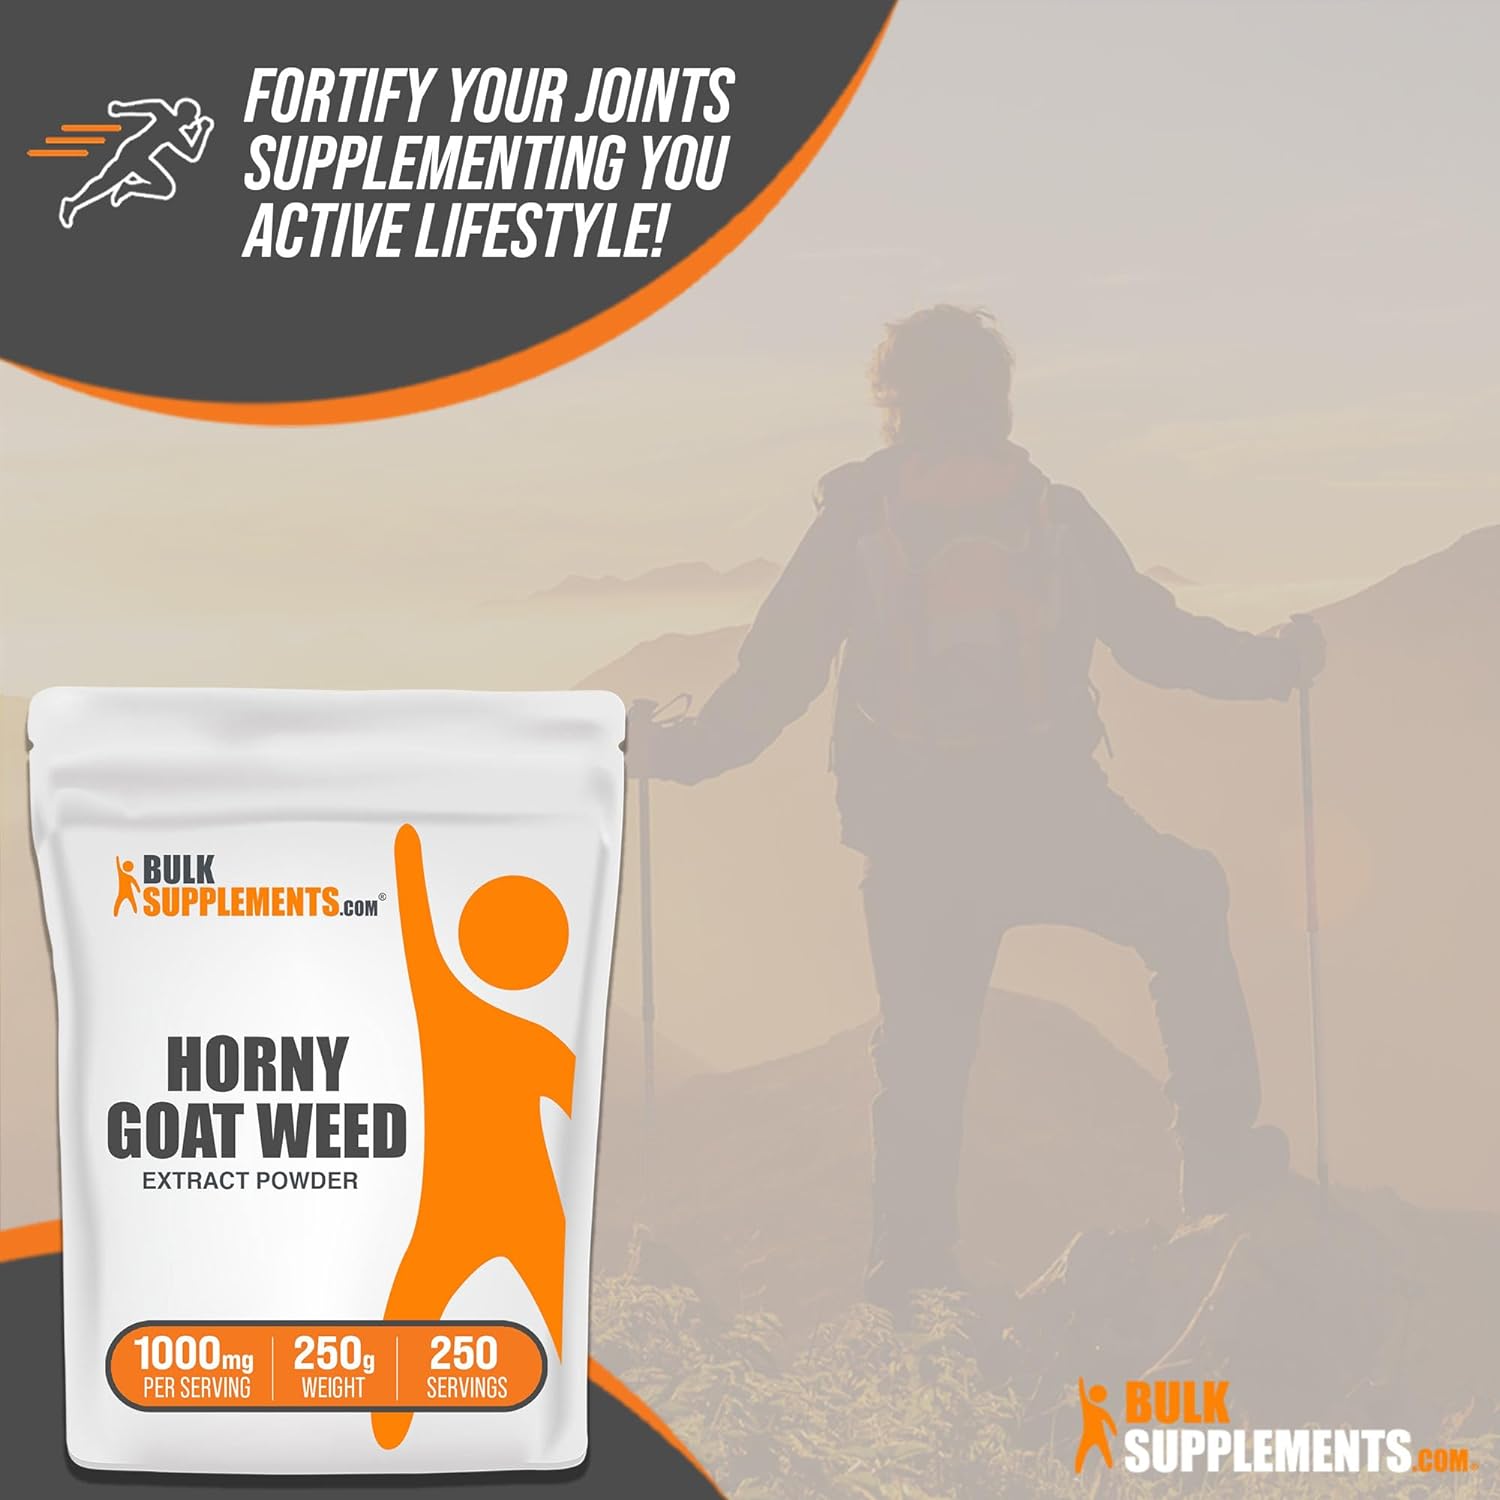 BULKSUPPLEMENTS.COM Horny Goat Weed Extract - Epimedium Extract, Horny Goat Weed Herbal Supplements, Horny Goat Weed Powder- Gluten Free, 1000mg per Serving, 250g (8.8 oz) (Pack of 1) : Health & Household